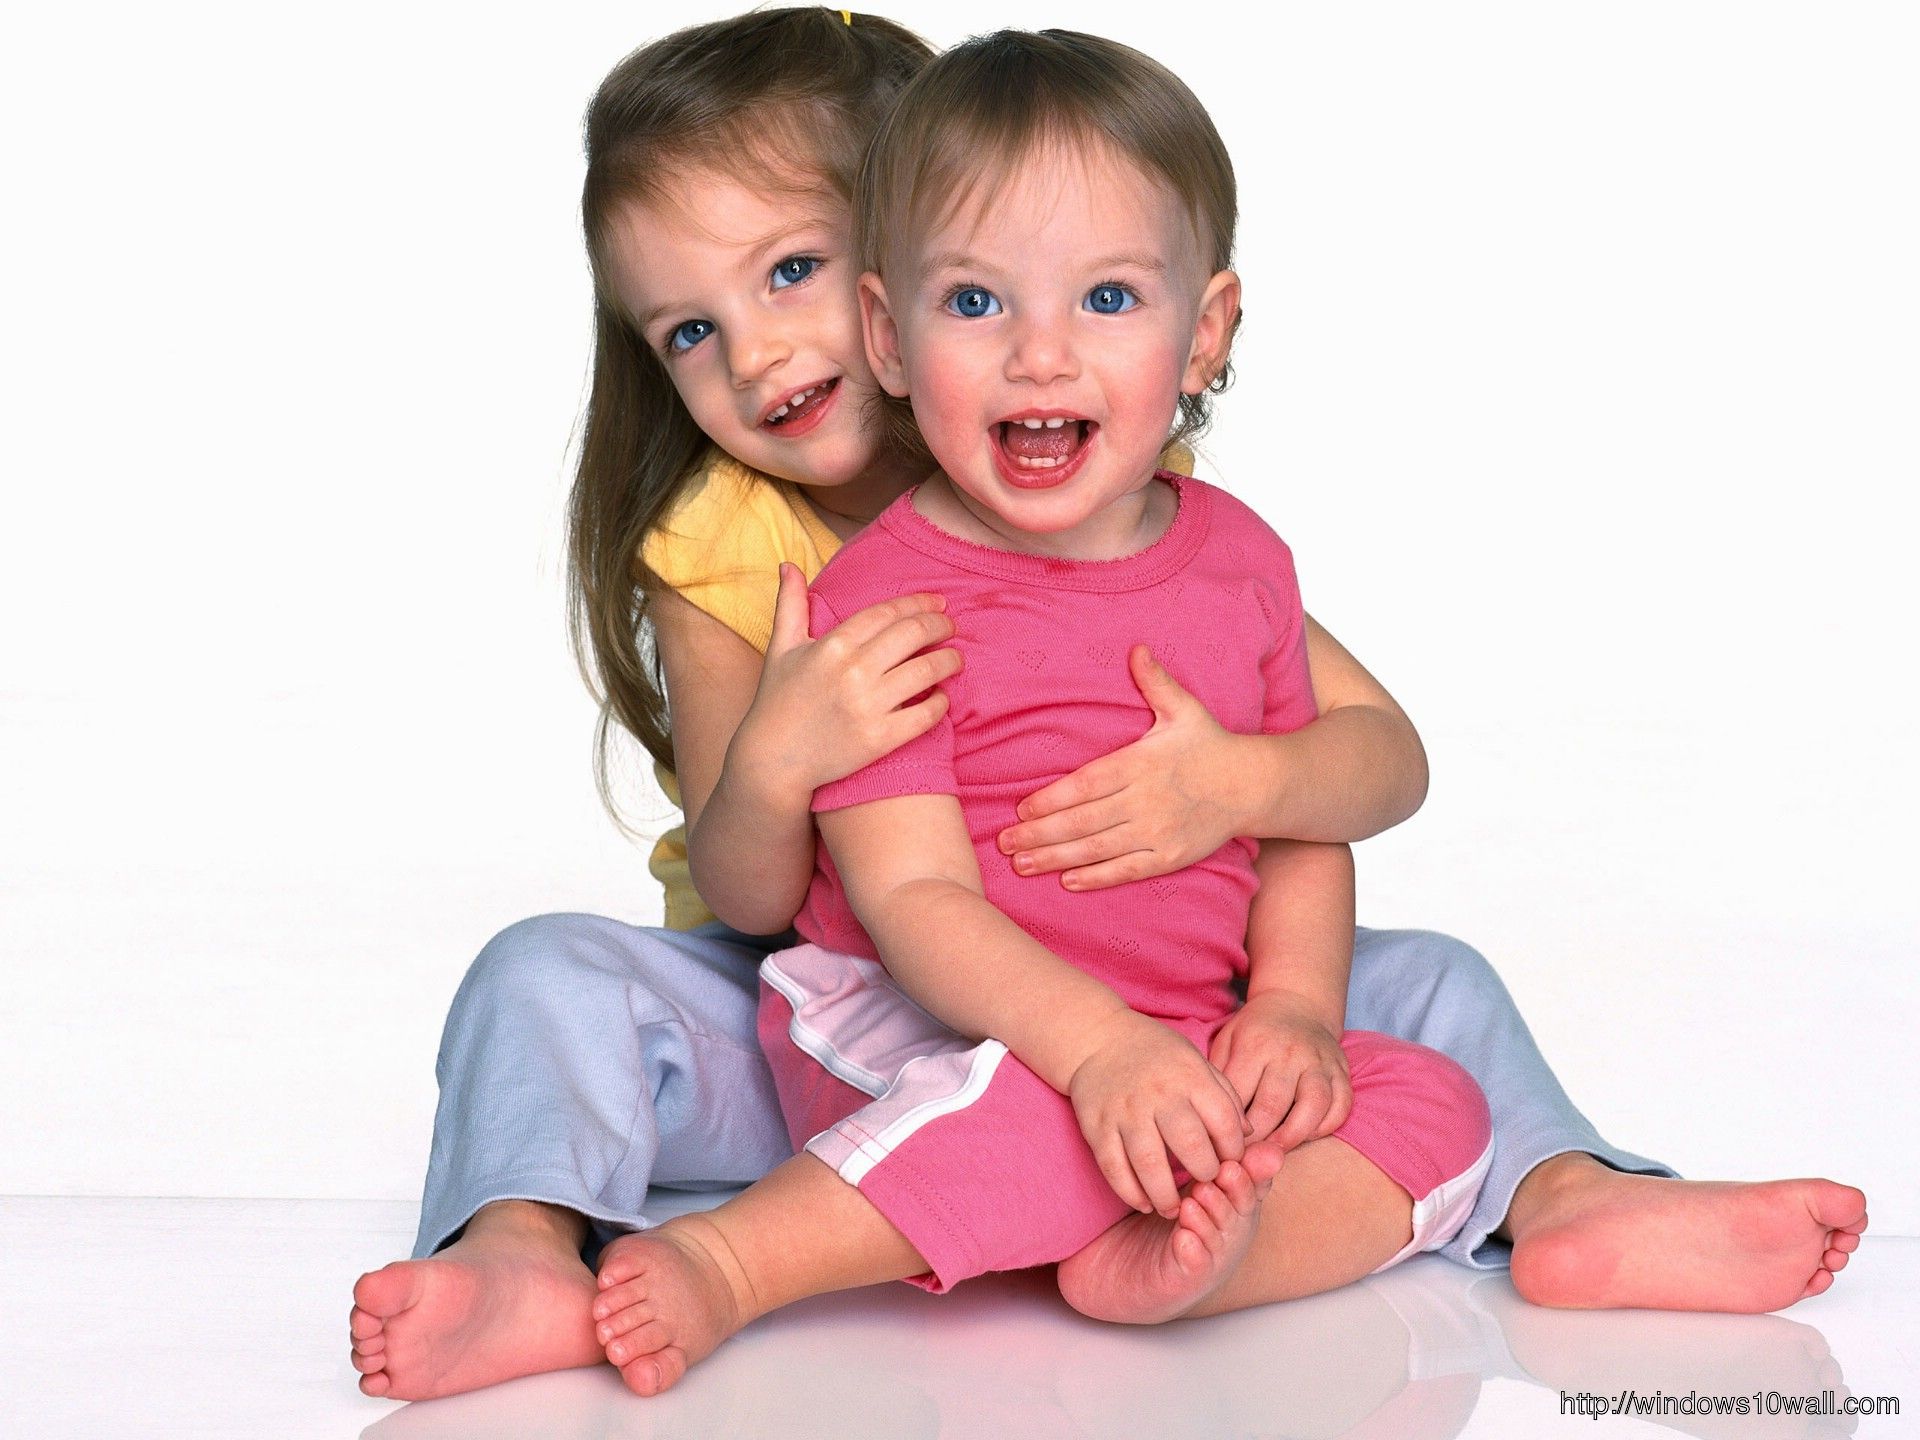 Cute Brother Sister Baby Smile Wallpapers.